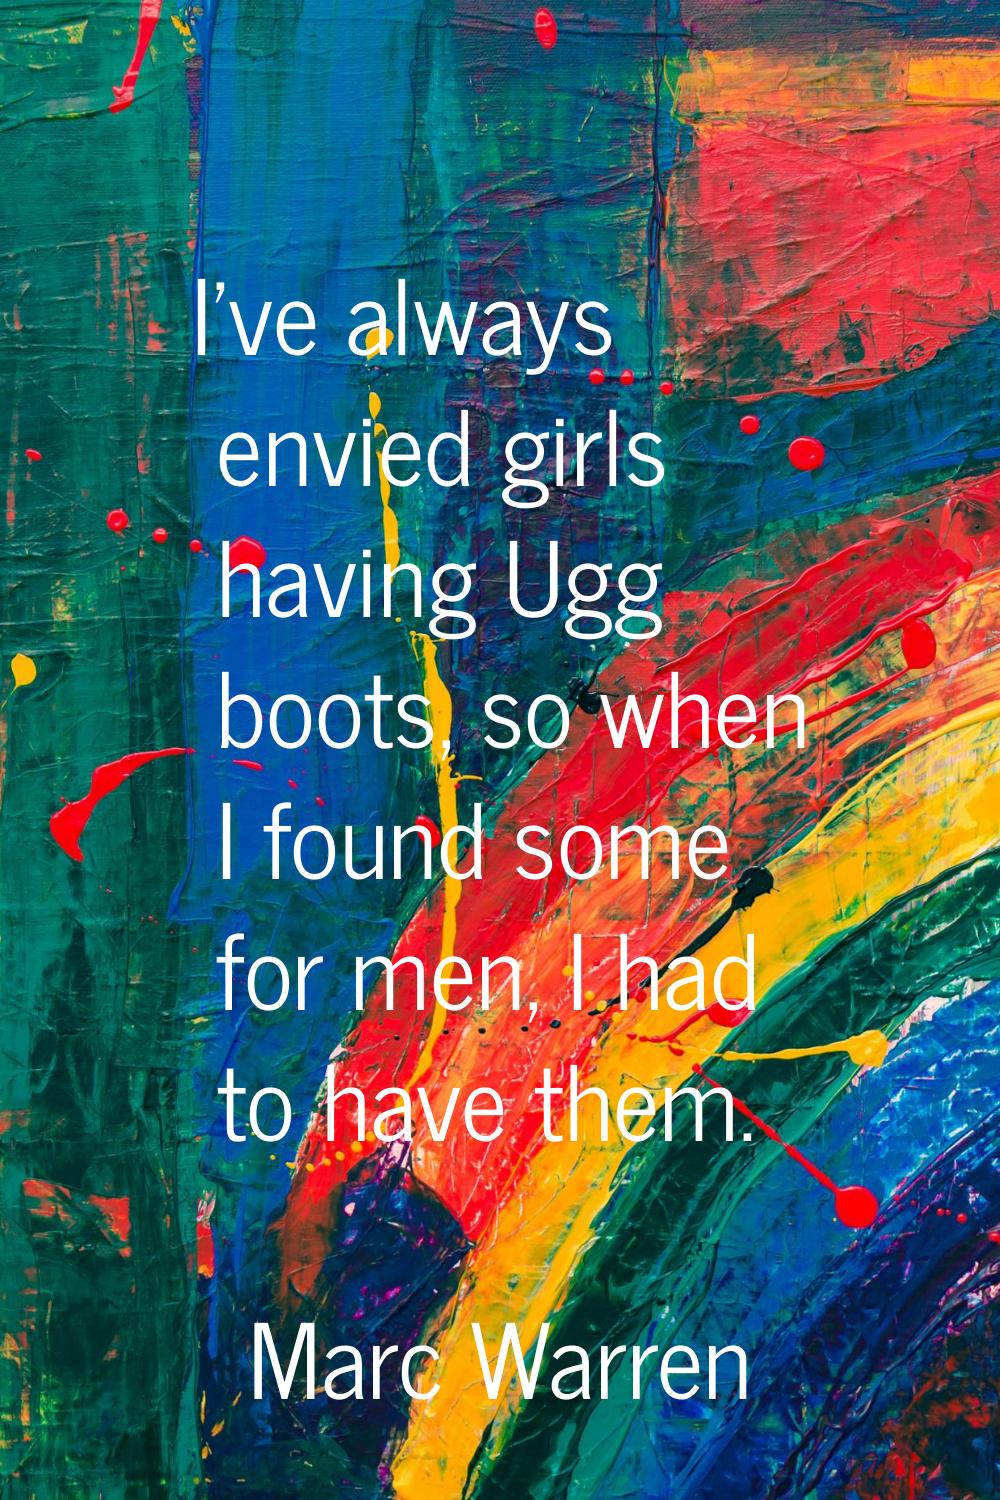 I've always envied girls having Ugg boots, so when I found some for men, I had to have them.